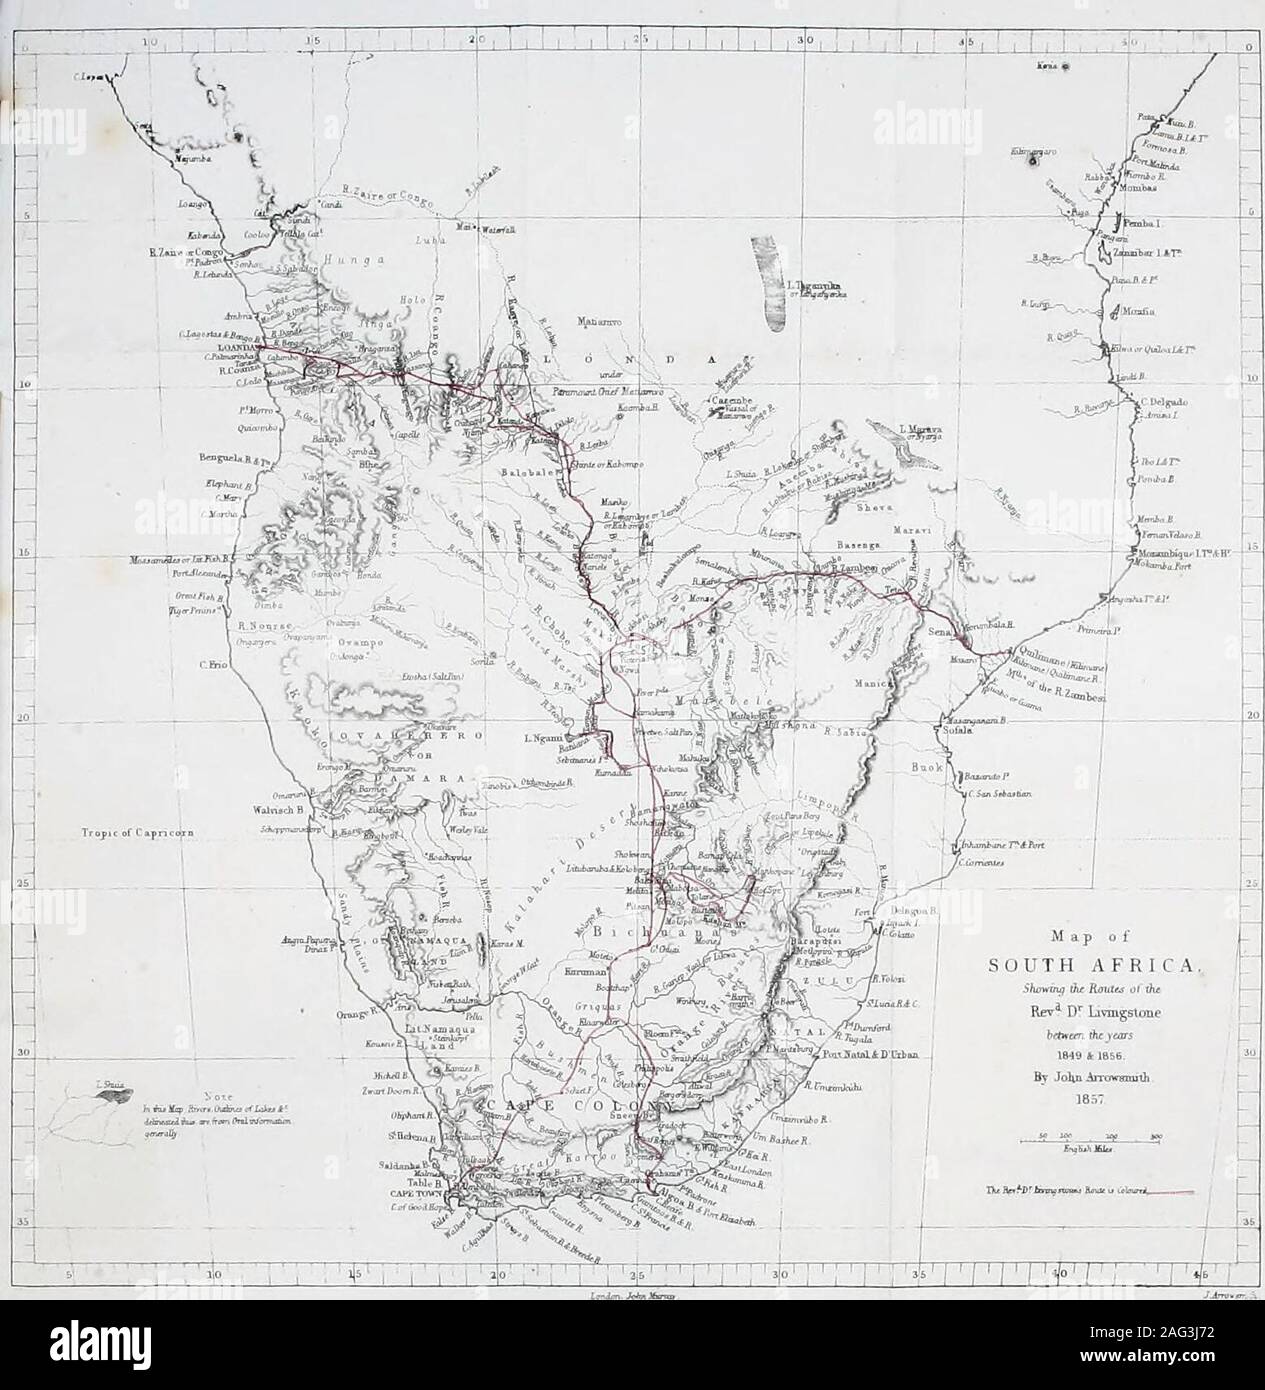 . Missionary travels and researches in South Africa : including a sketch of sixteen years' residence in the interior of Africa, and a journey from the Cape of Good Hope to Loanda, on the west coast, thence across the continent, down the river Zambesi, to the eastern ocean. Map of SOUTH AFRICA, Showing the Raut&s of the. Rev Dr Lrvmgstceoe between the years 1849 & 1856. By Jolyi Arrowsmitb. 1857. Enqlish MilesDu fax?!)?btvtnaztan&s Routt us ioicurtA.. I- L  2H L. Albemarle Street, November 1, 1857. MR. MURRAYSLIST OF RECENT WORKS. A Memoir of the Remarkable Events which attended the Accession t Stock Photo